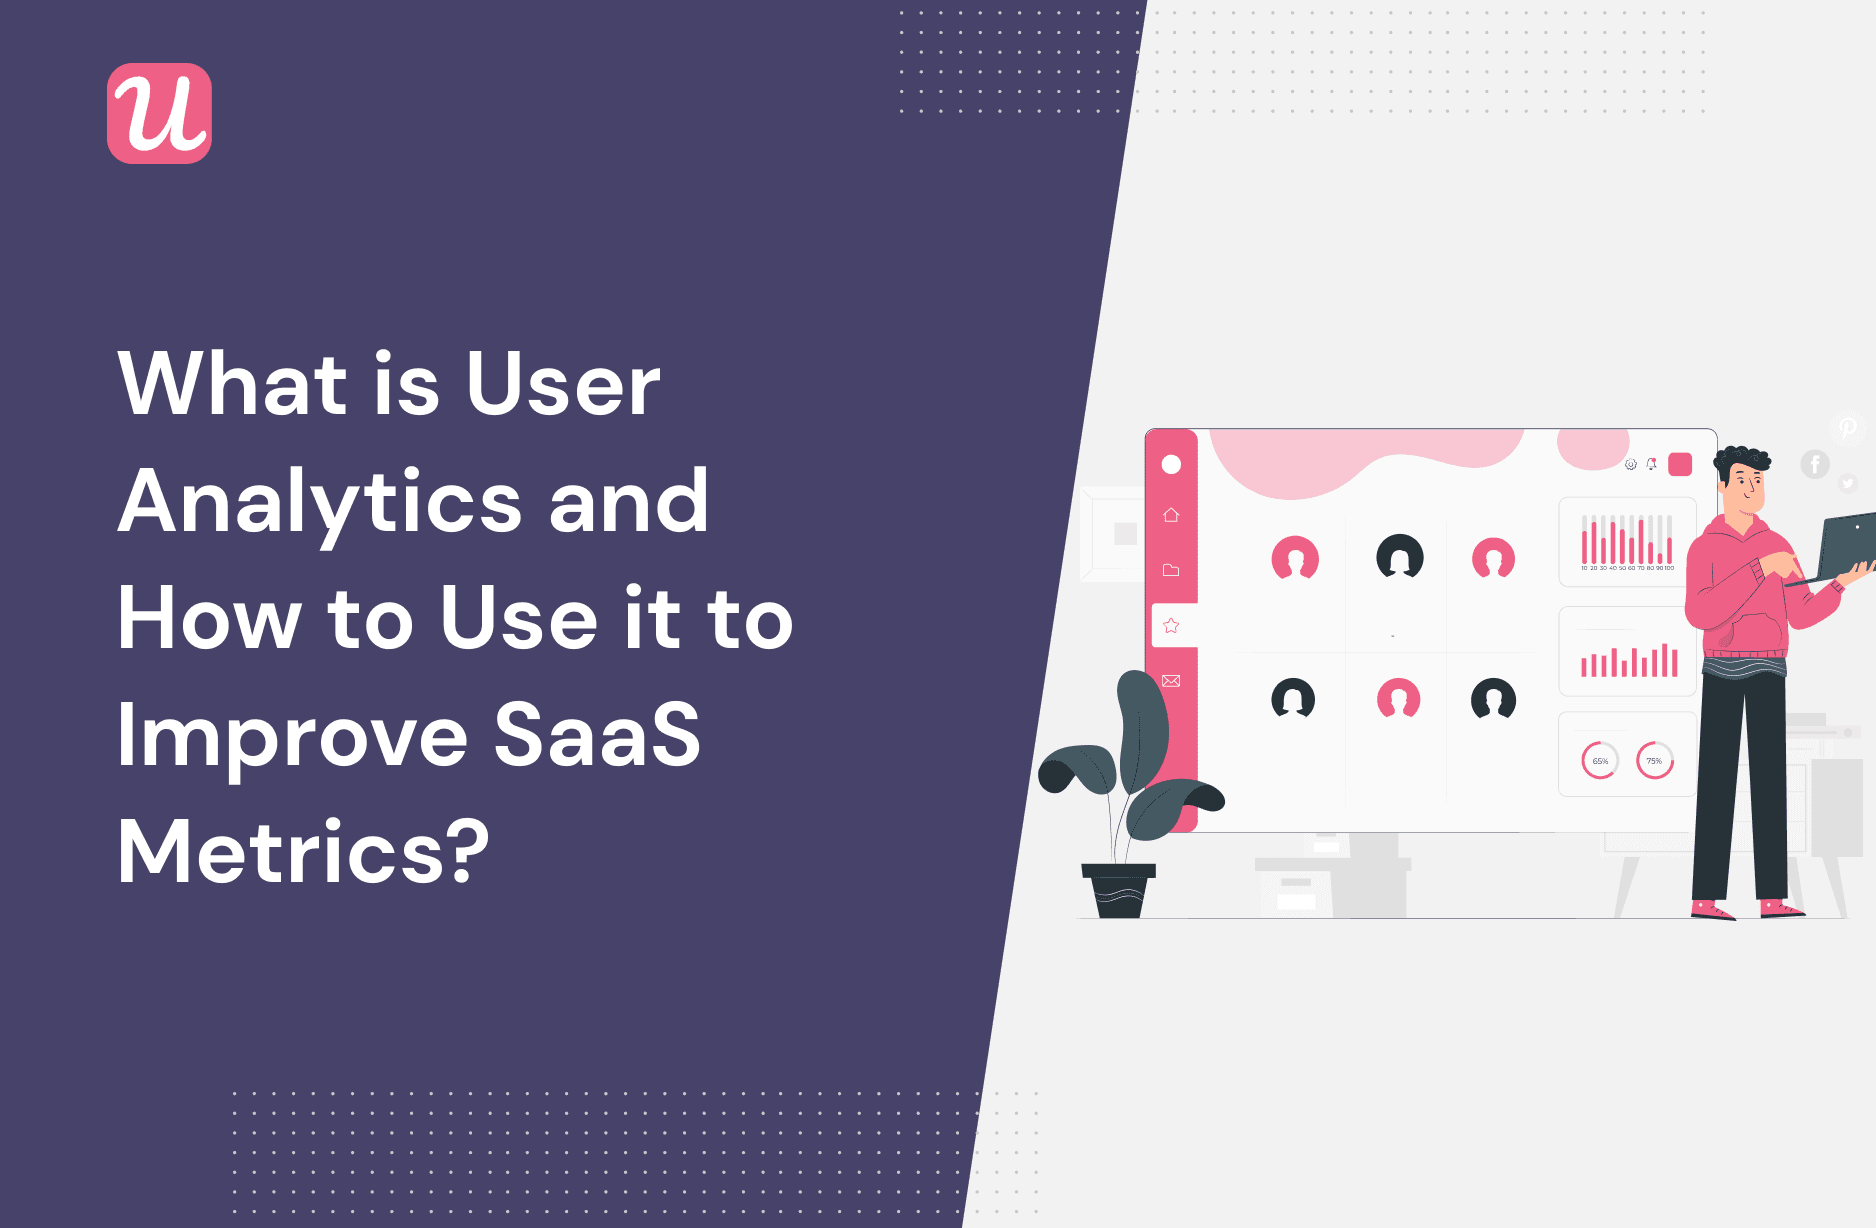 What Is User Analytics And How To Use It To Improve SaaS Metrics?